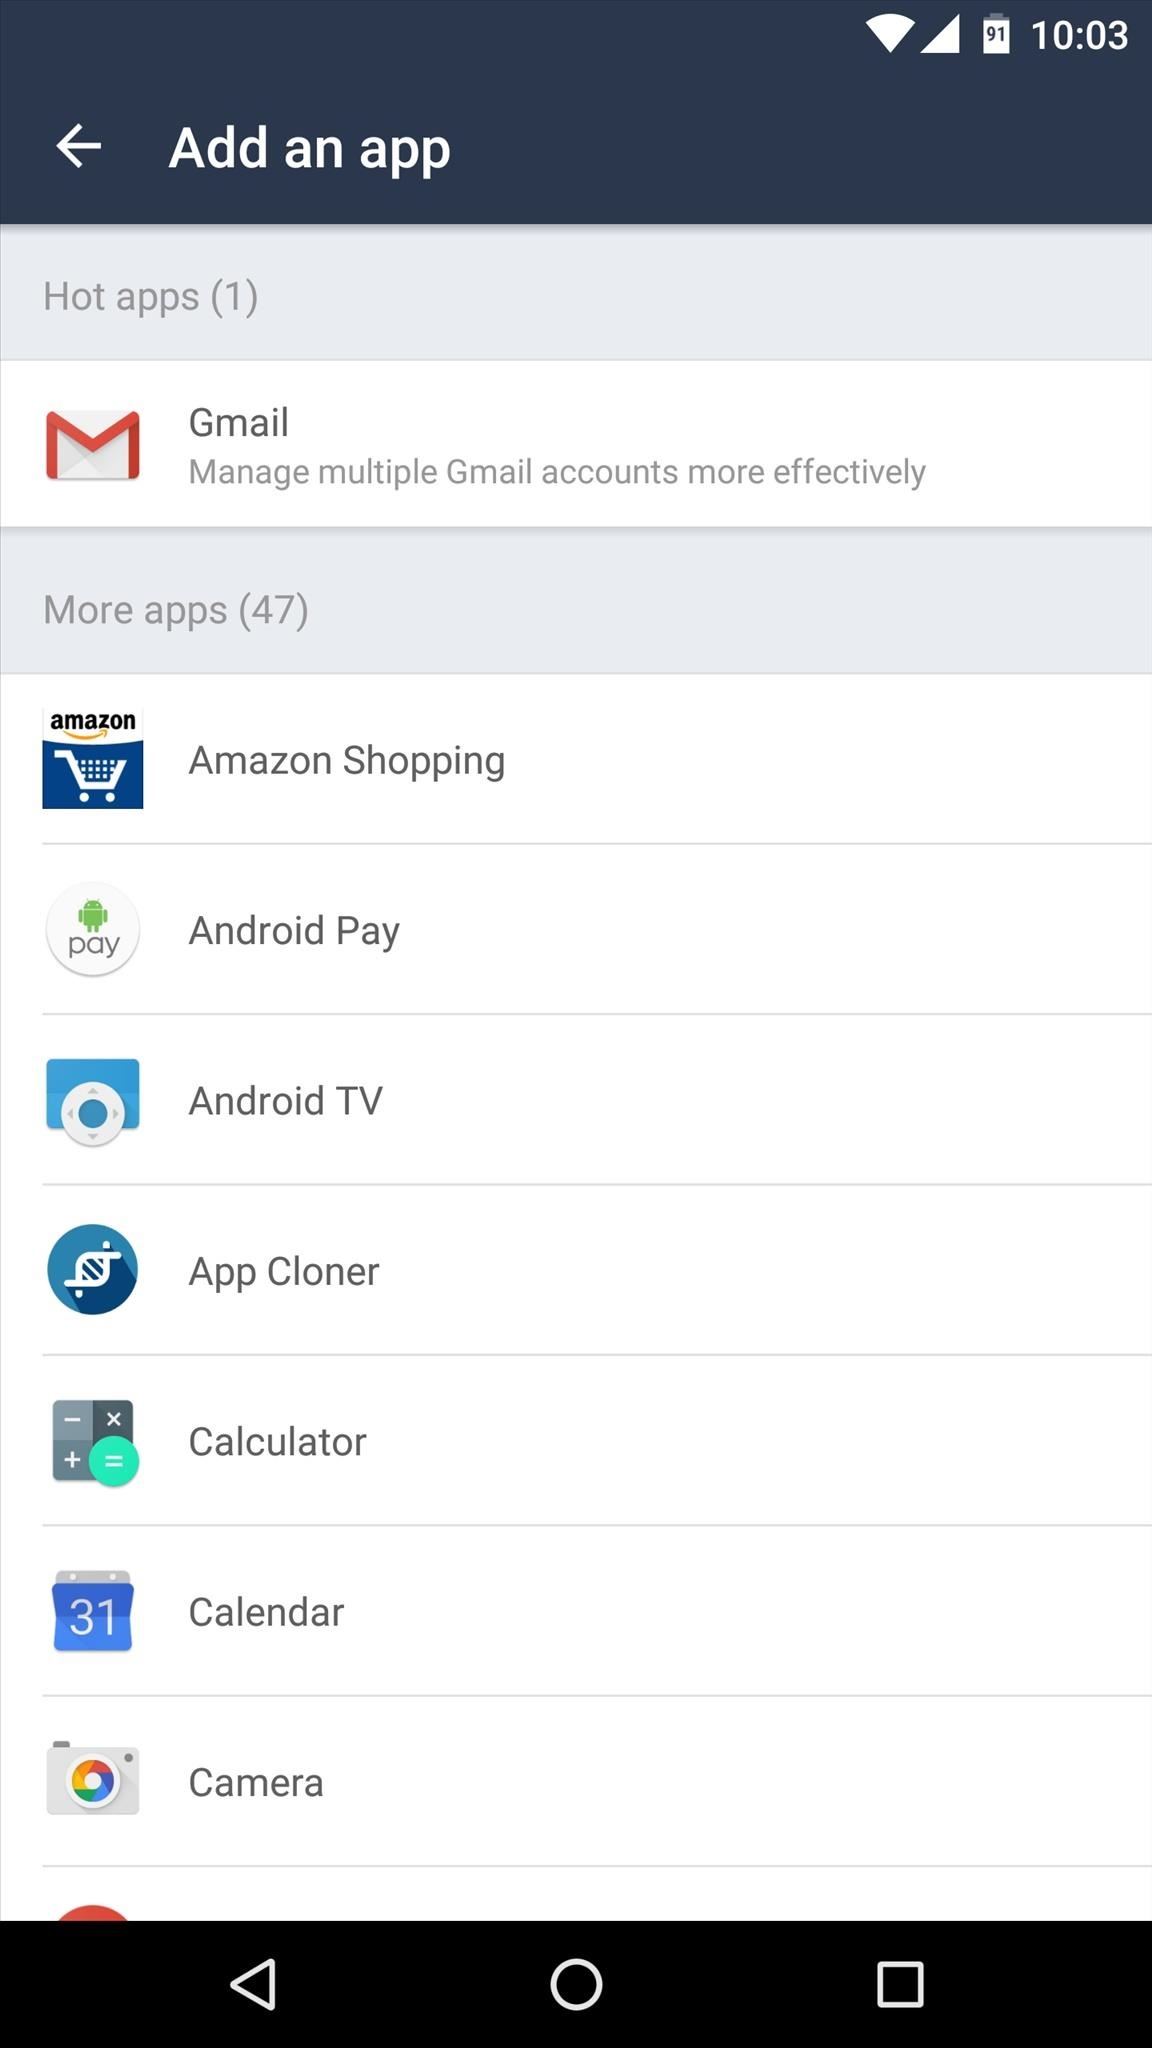 Make Copies of Your Apps to Stay Logged into Multiple Accounts at Once